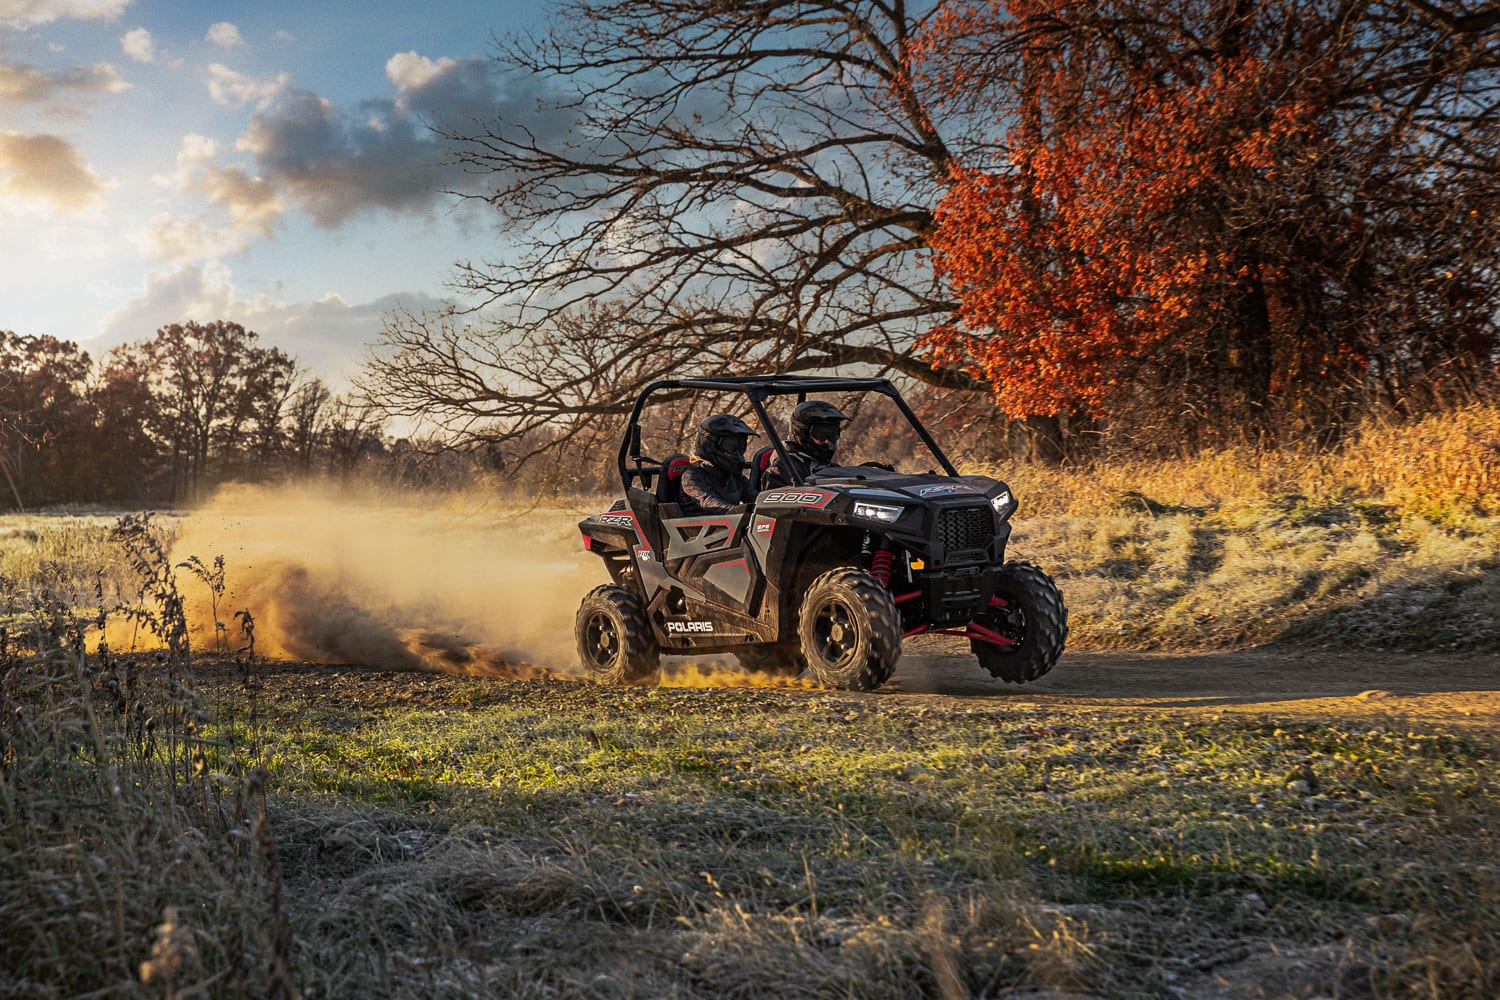 All-New 2020 RZR and Sportsman Limited-Edition Models